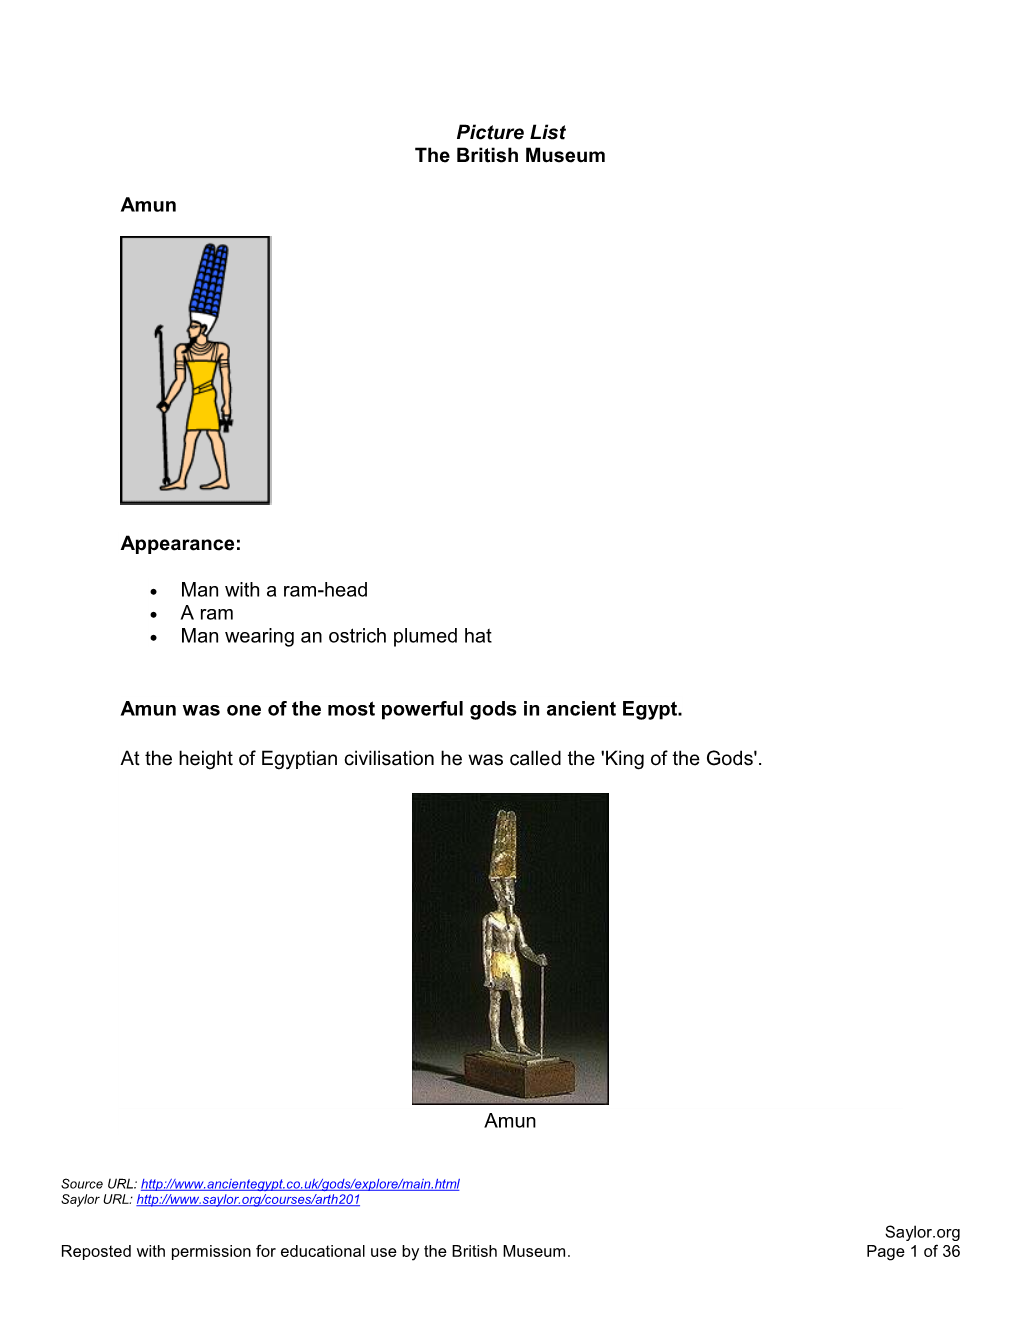 Picture List the British Museum Amun Appearance: • Man with a Ram-Head